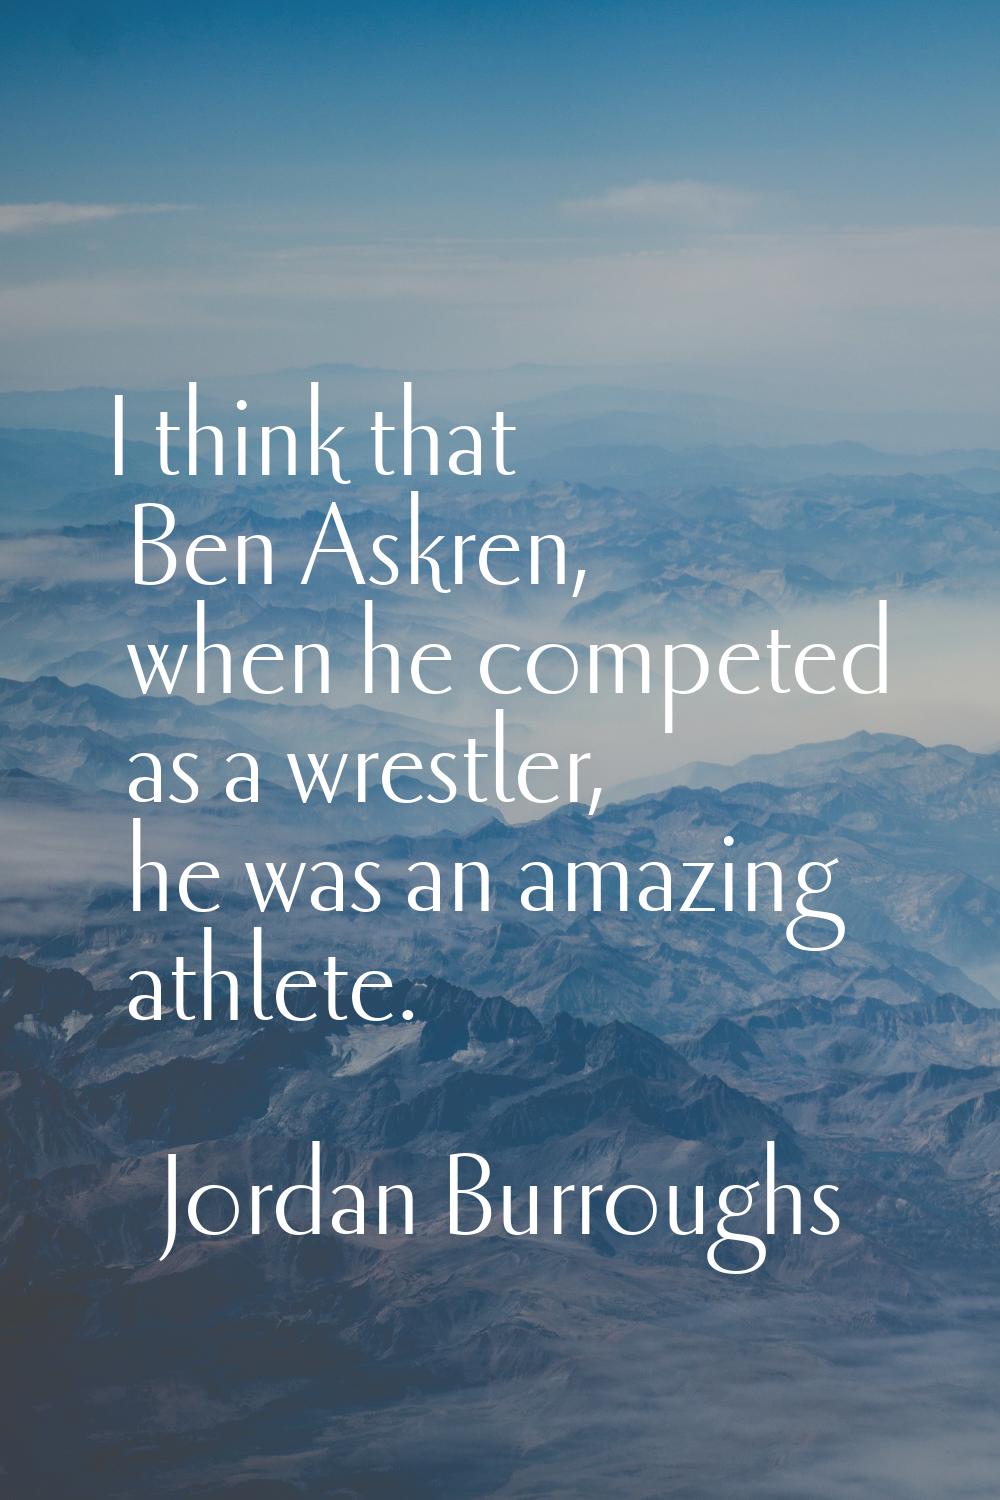 I think that Ben Askren, when he competed as a wrestler, he was an amazing athlete.